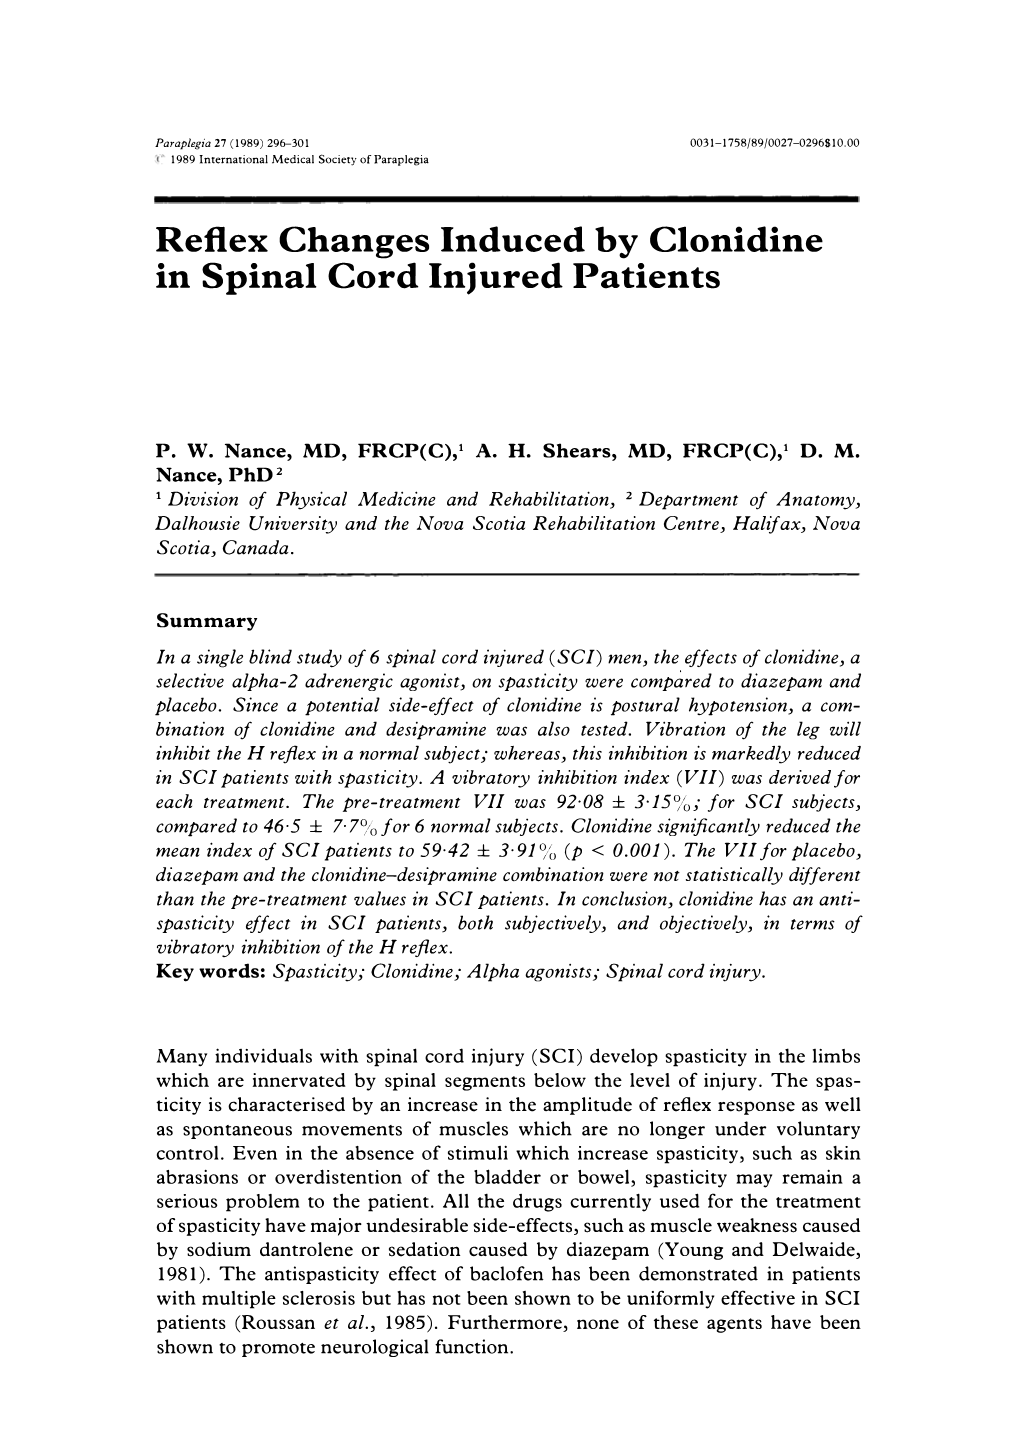 Reflex Changes Induced by Clonidine in Spinal Cord Injured Patients